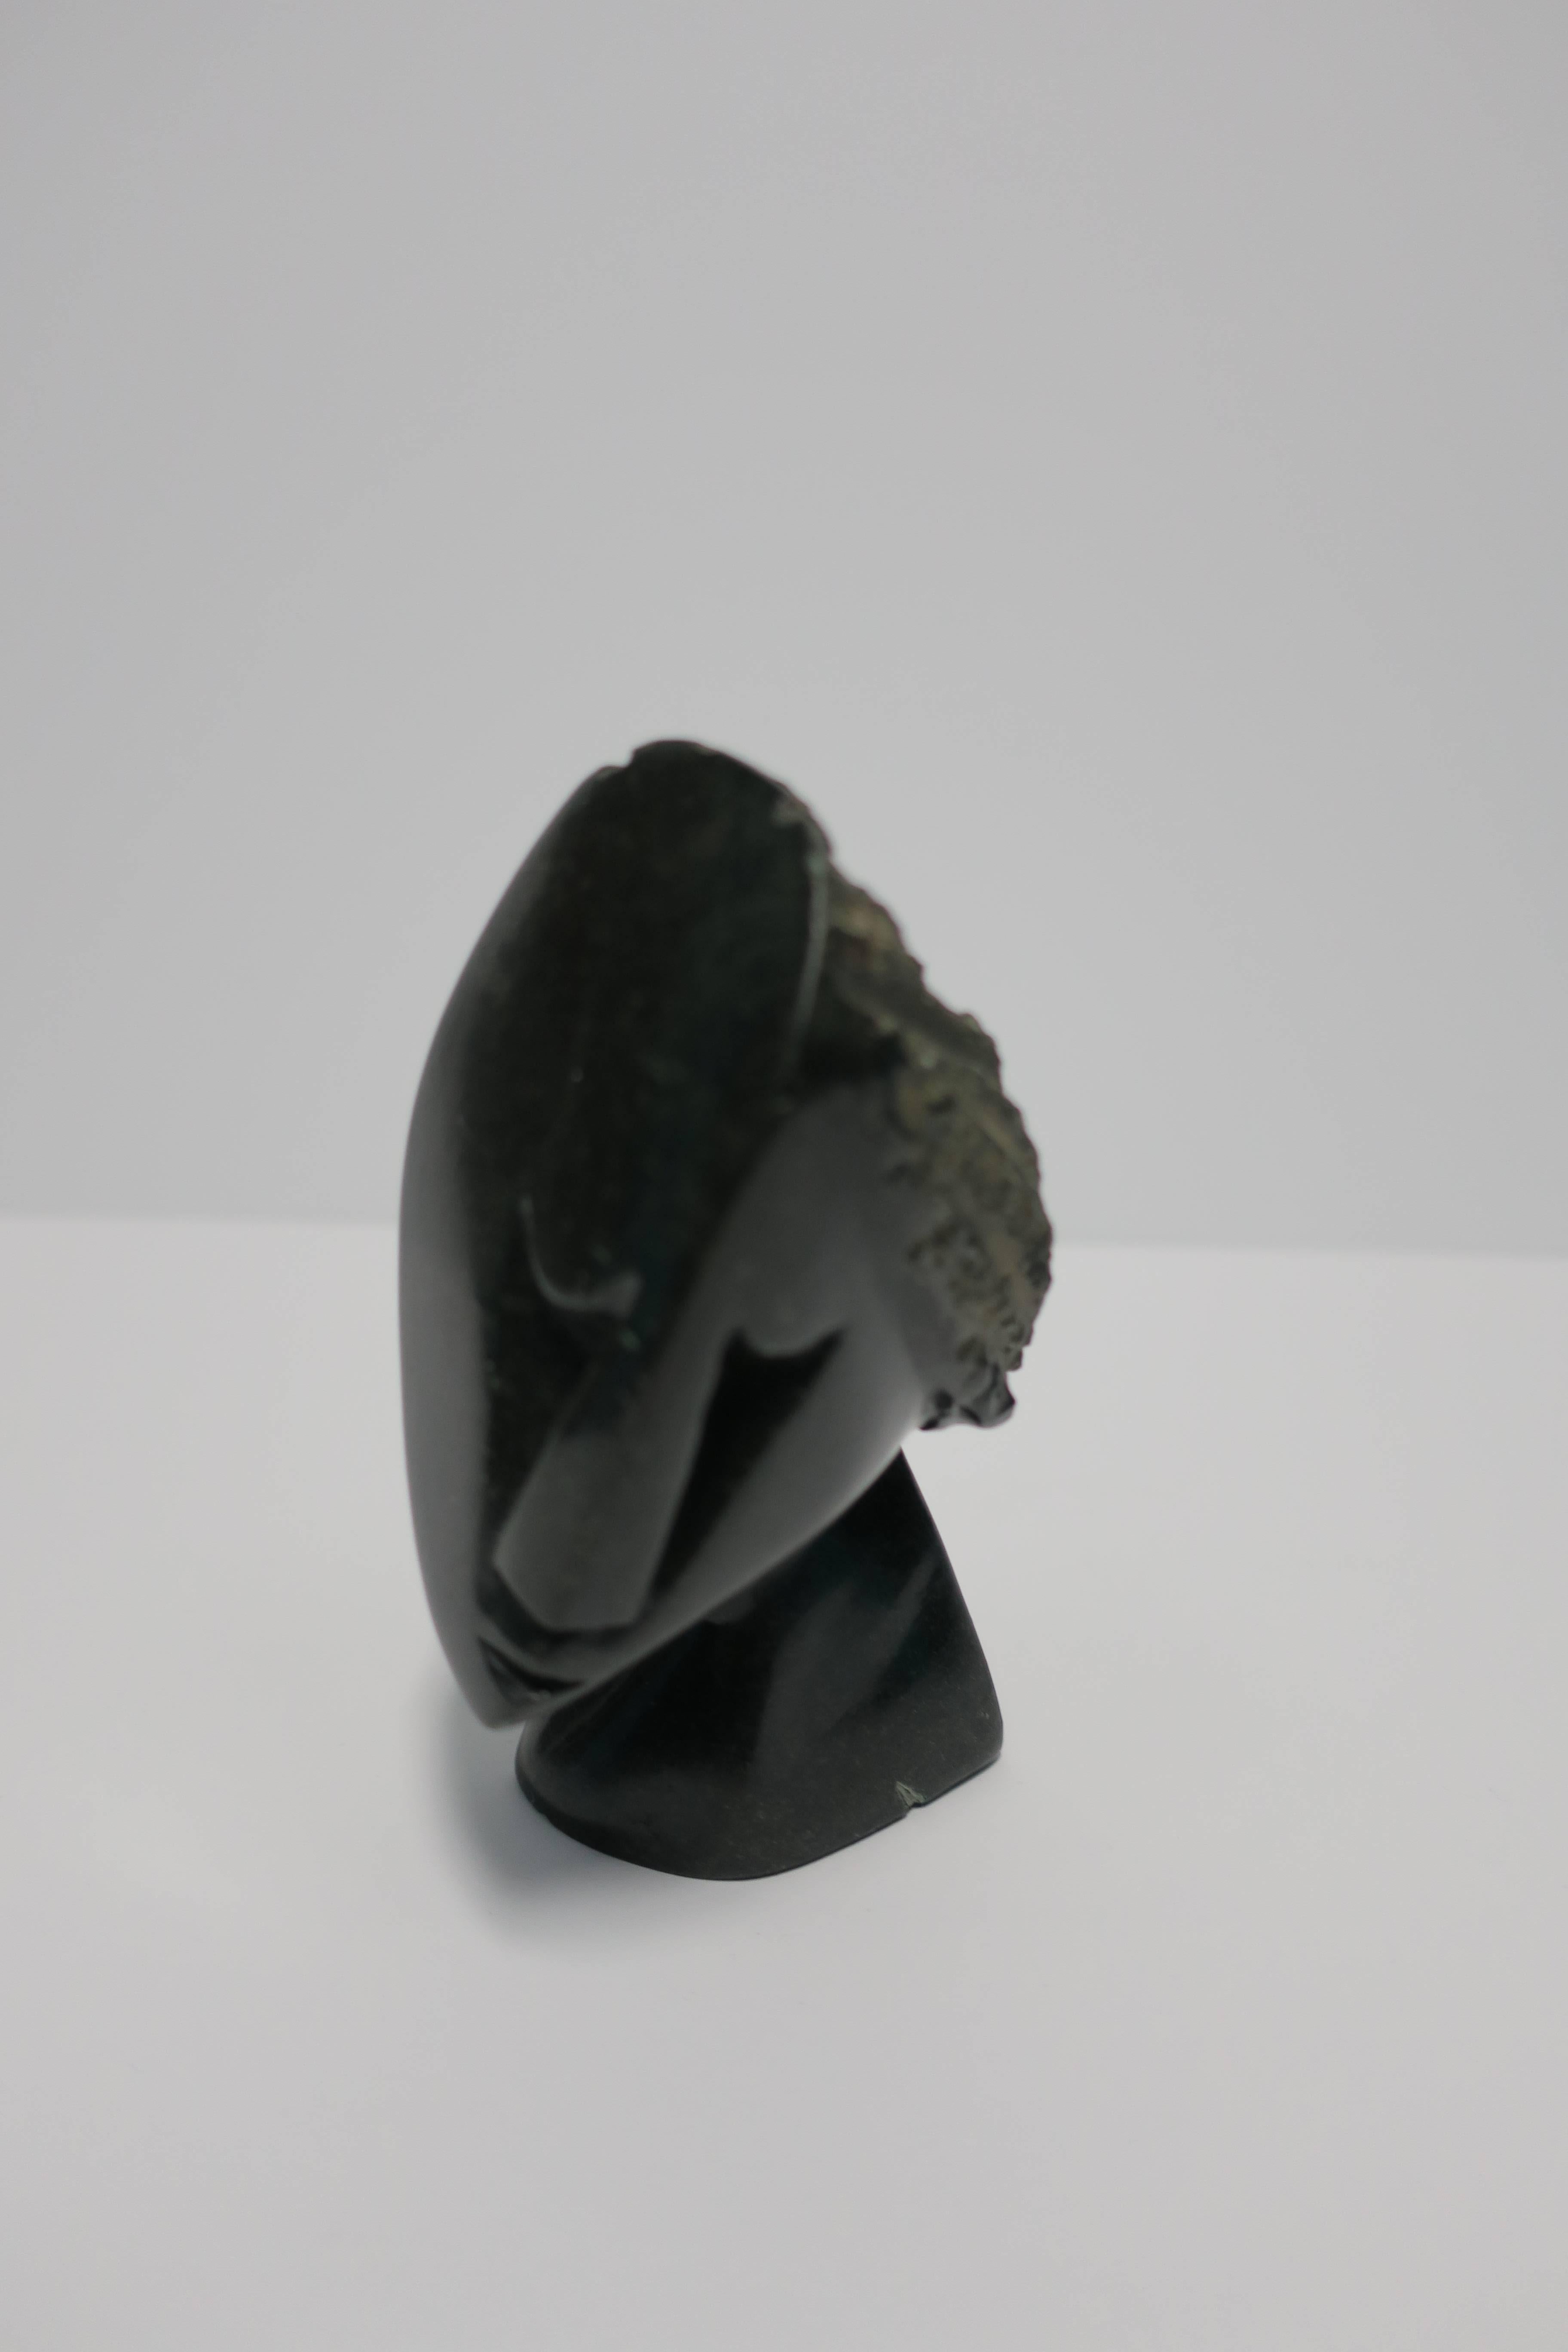 Hand-Carved Black Stone Cubist Sculpture after Picasso